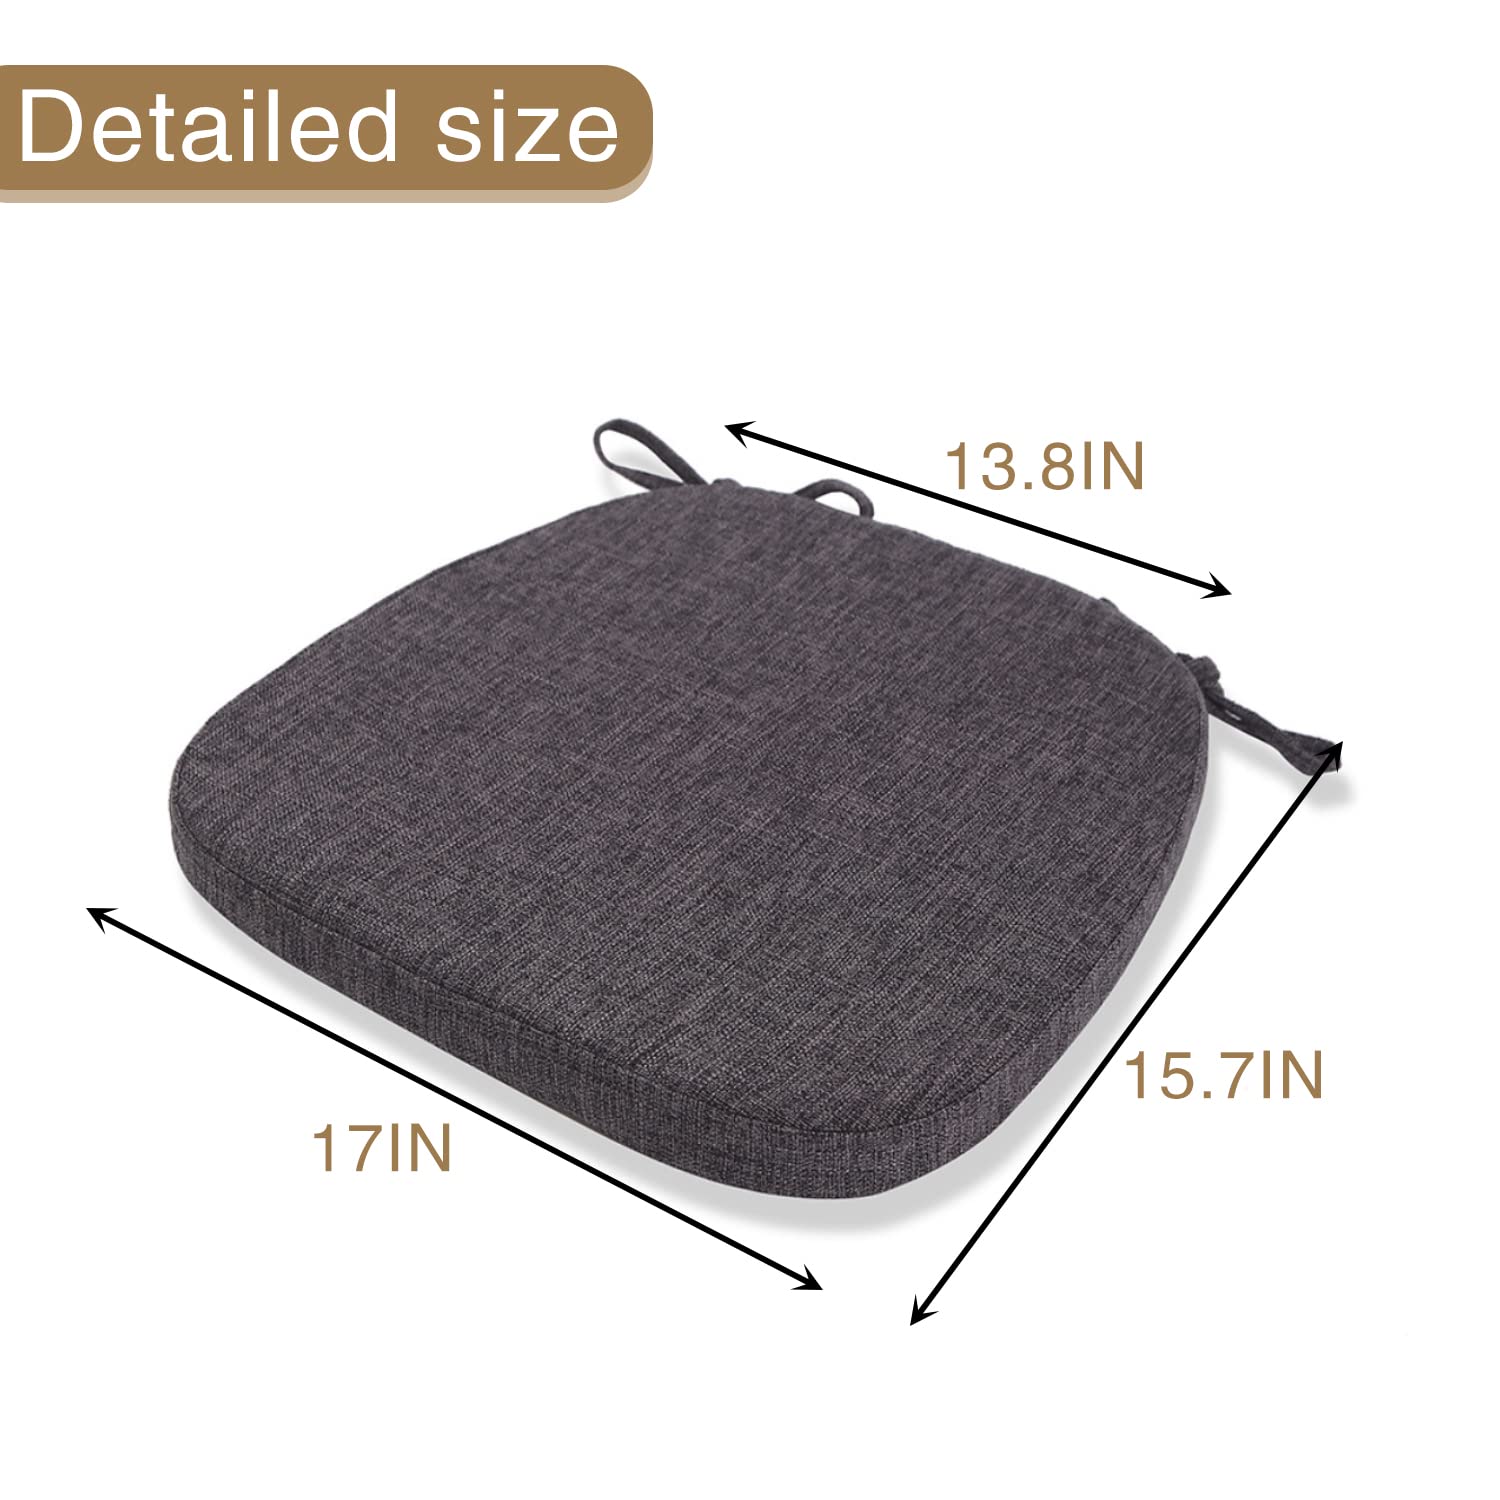 Kimgull Chair Cushions with Ties, Non Slip Chair Pads Set of 4, Thickened Breathable Cover Detachable Seat Cushion, for Kitchen Dining Living Room Office Chair (17x15.7x2In Yellow)